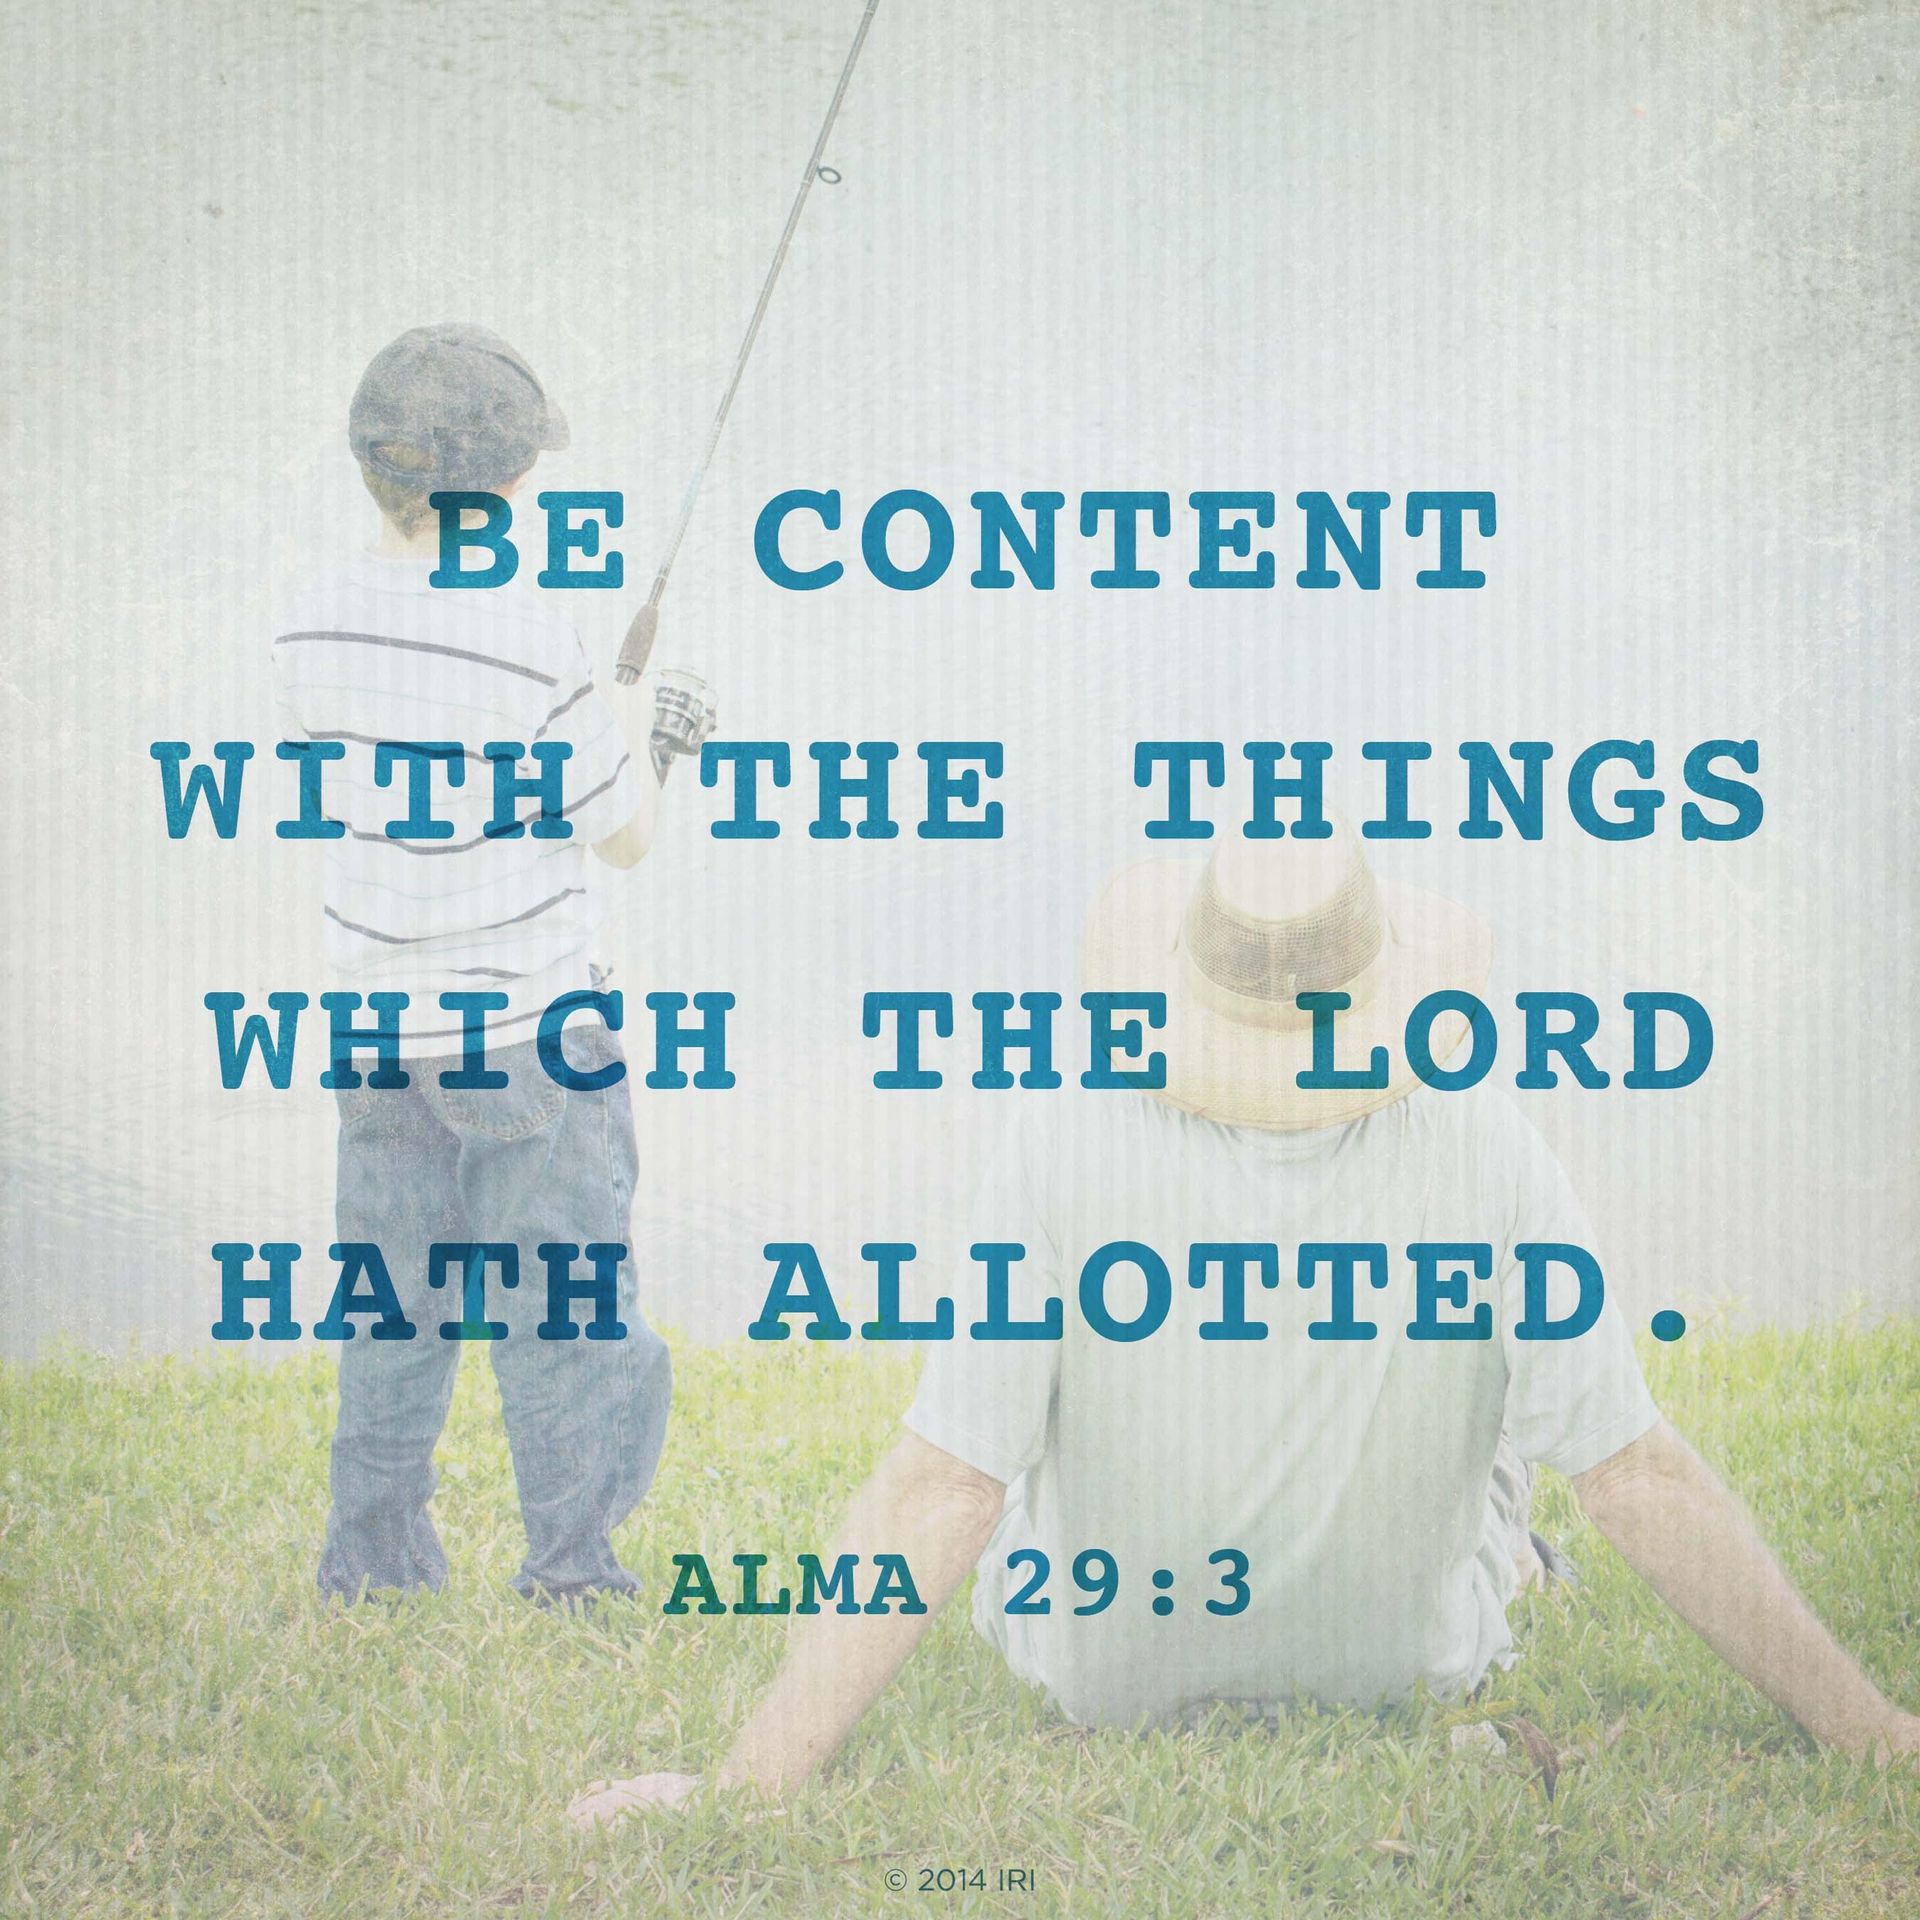 “Be content with the things which the Lord hath allotted.”—Alma 29:3